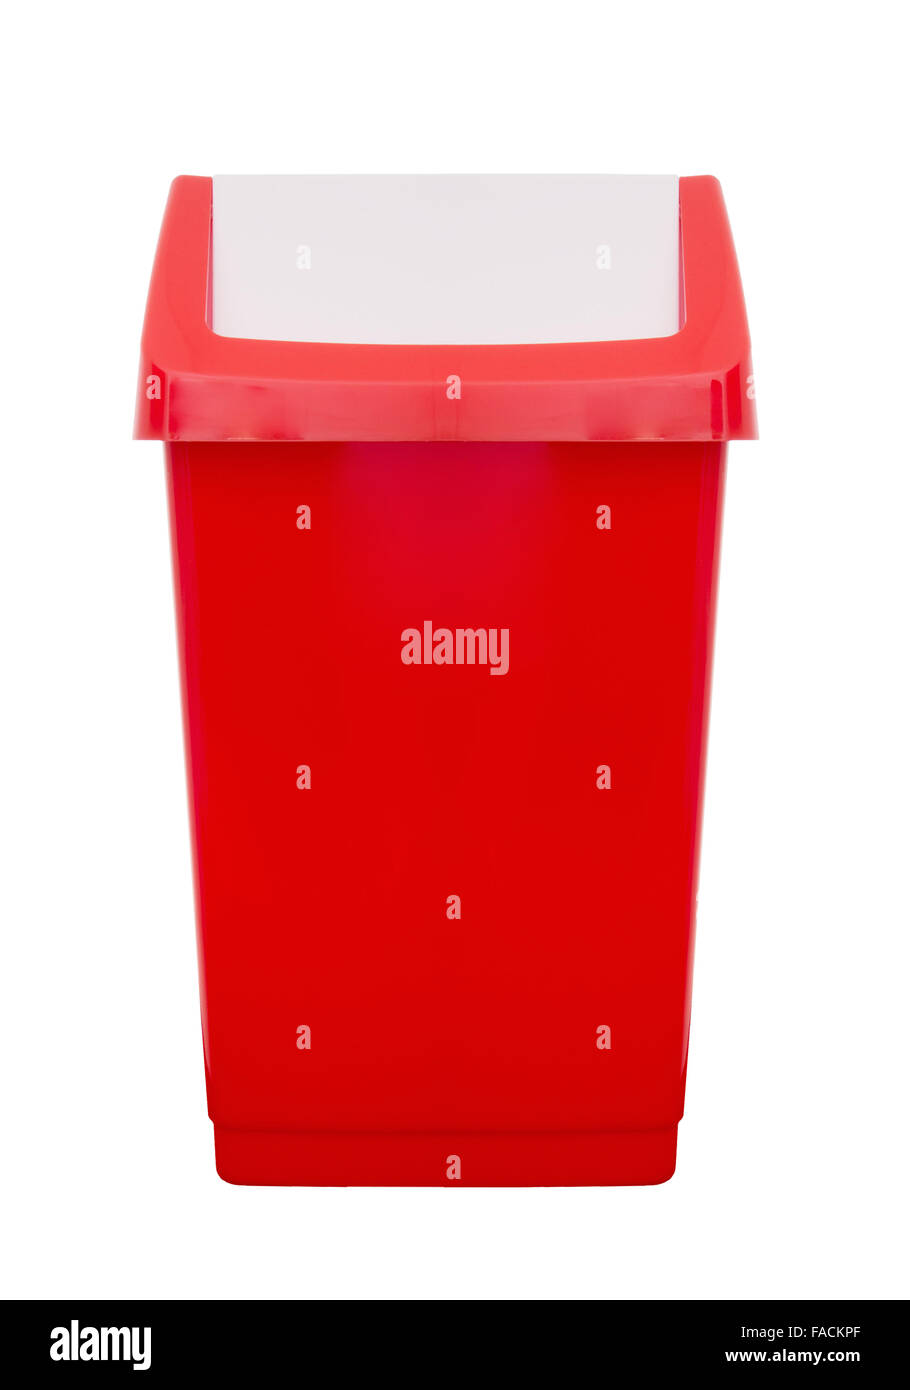 Red kitchen rubbish bin. Isolated on white. Stock Photo